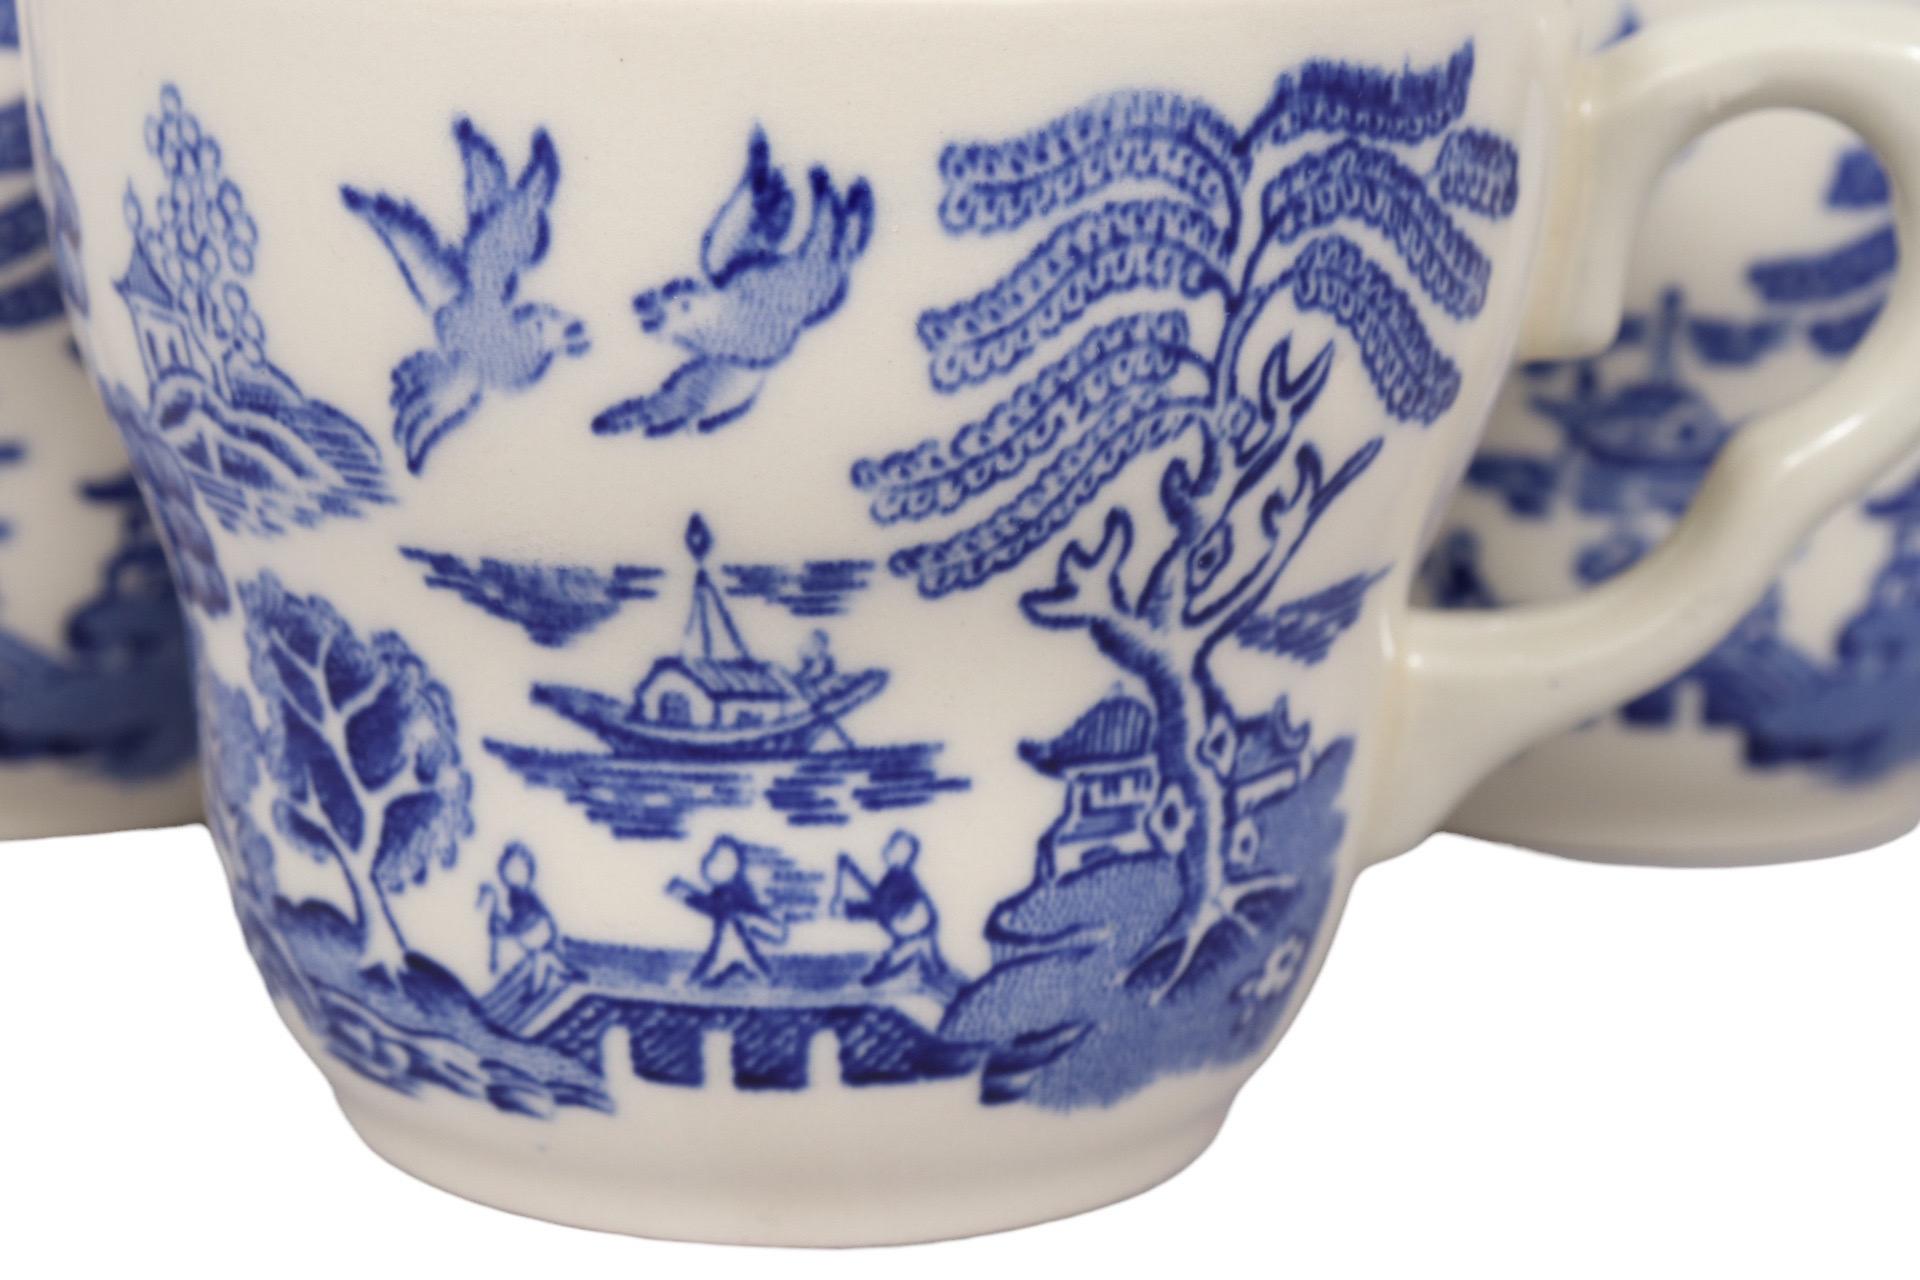 A set of eight blue and white transferware ceramic teacups, reminiscent of the Johnson Brothers Ironstone, made by English Ironstone Tableware Ltd of Staffordshire. Shapely cups with loop handles are decorated in the ‘Blue Willow’ pattern which